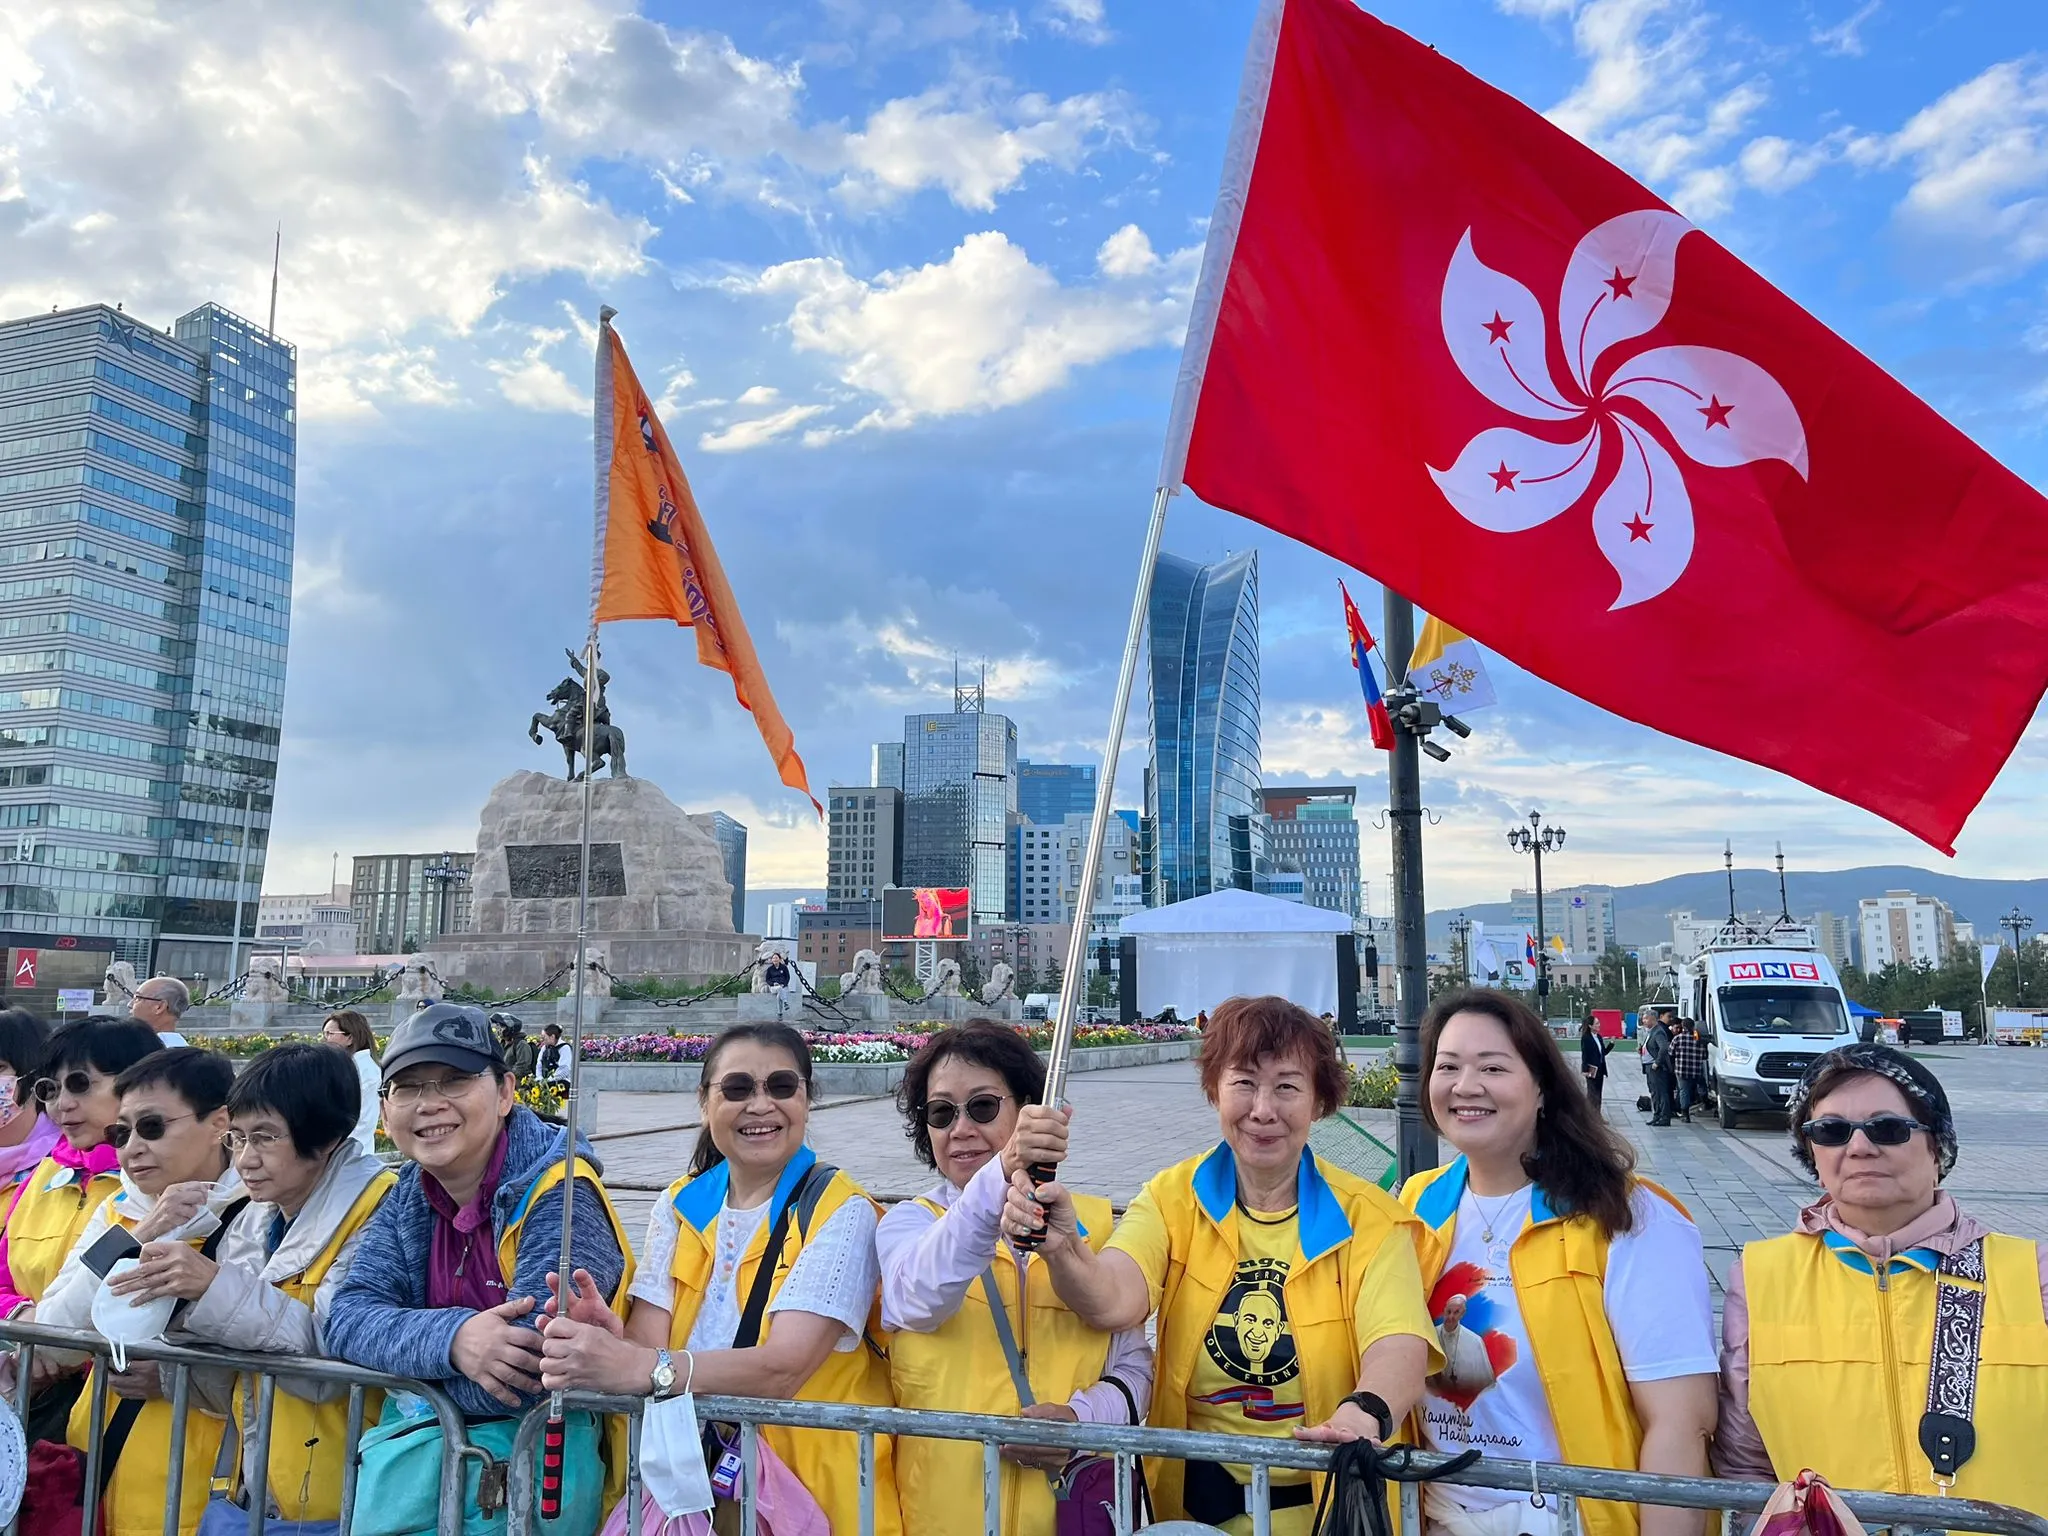 Catholic pilgrims from Hong Kong came to see the pope at the welcome ceremony in Sukhbaatar Square in Ulaanbaatar, Mongolia, on Sept. 2, 2023.?w=200&h=150